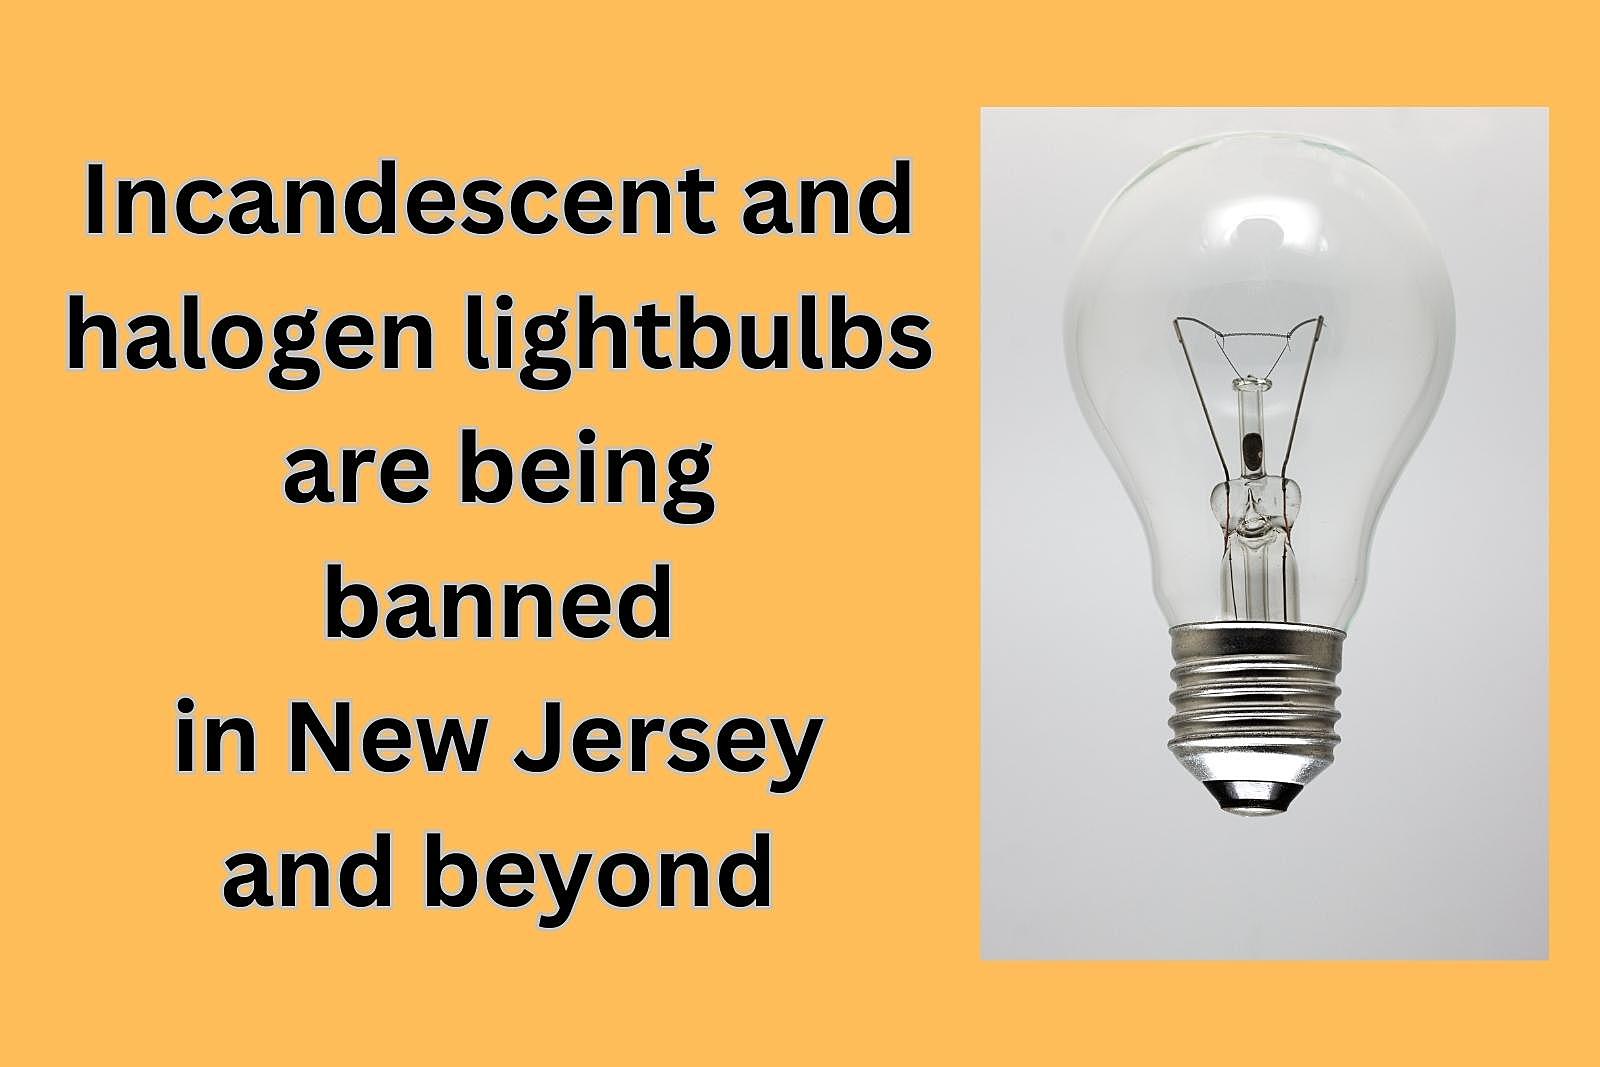 August 1st: New Law Bans One Very Common Household Item in NJ